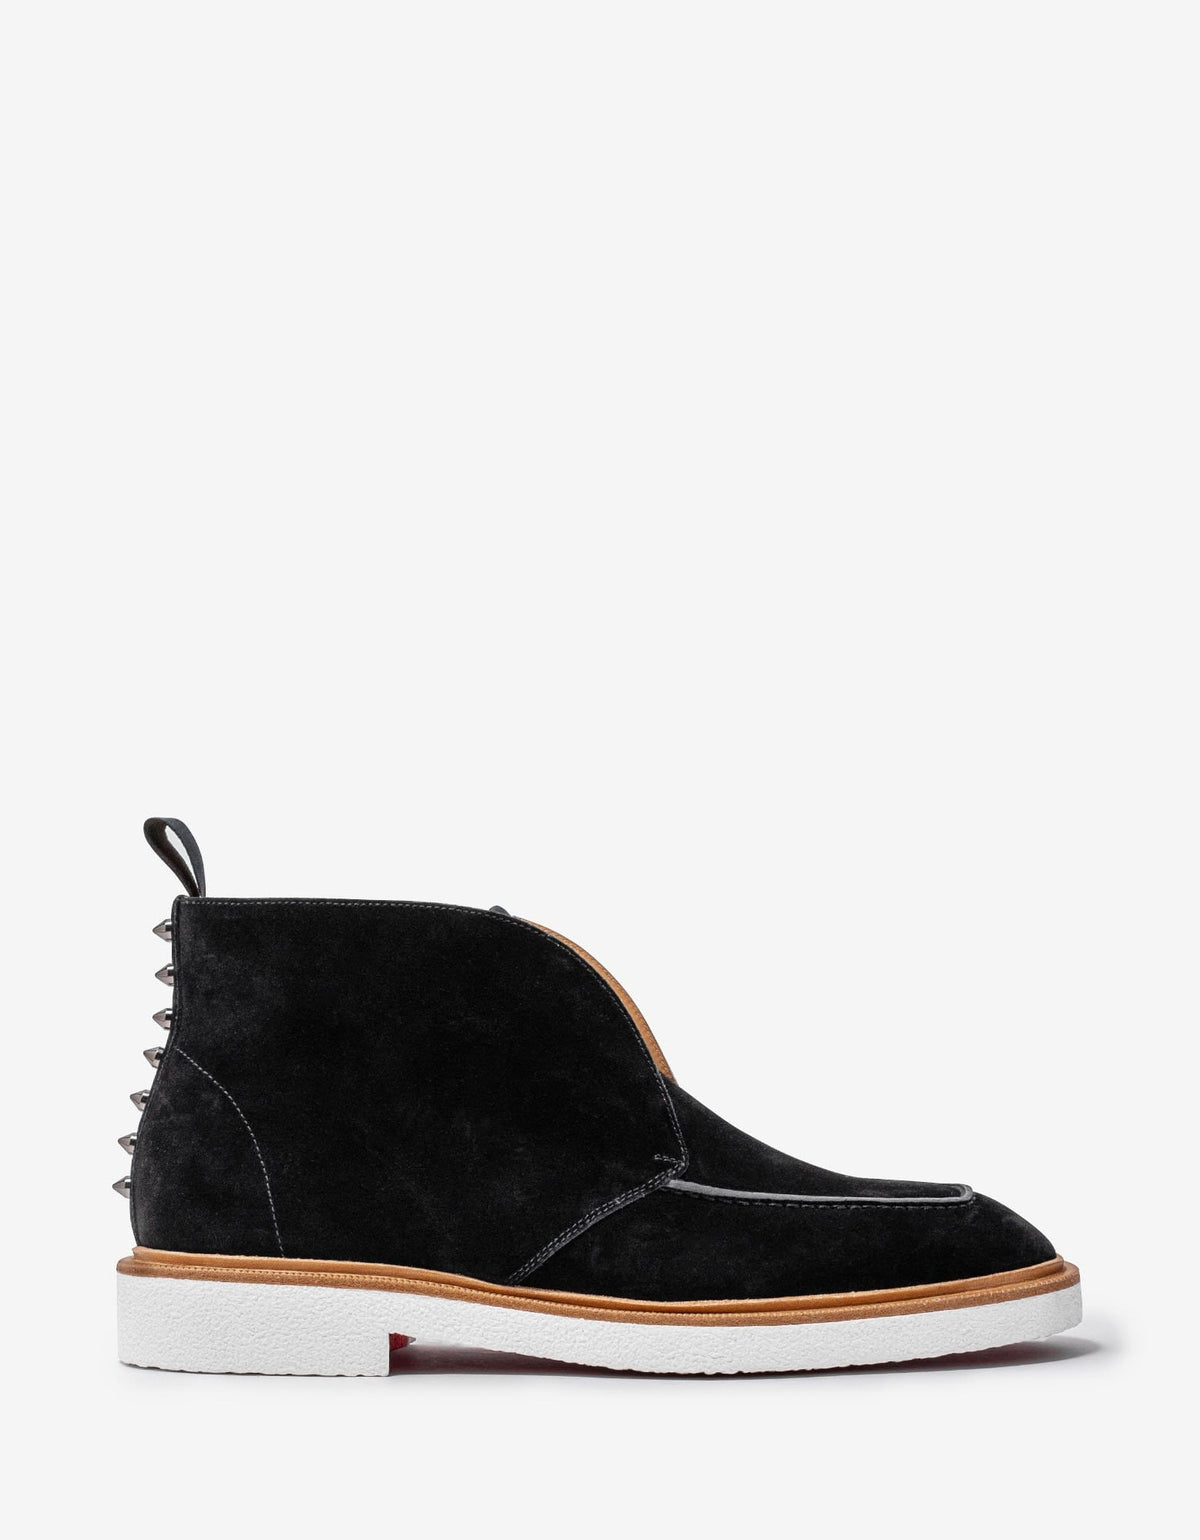 Christian Louboutin Citycrepe Black Suede Ankle Boots